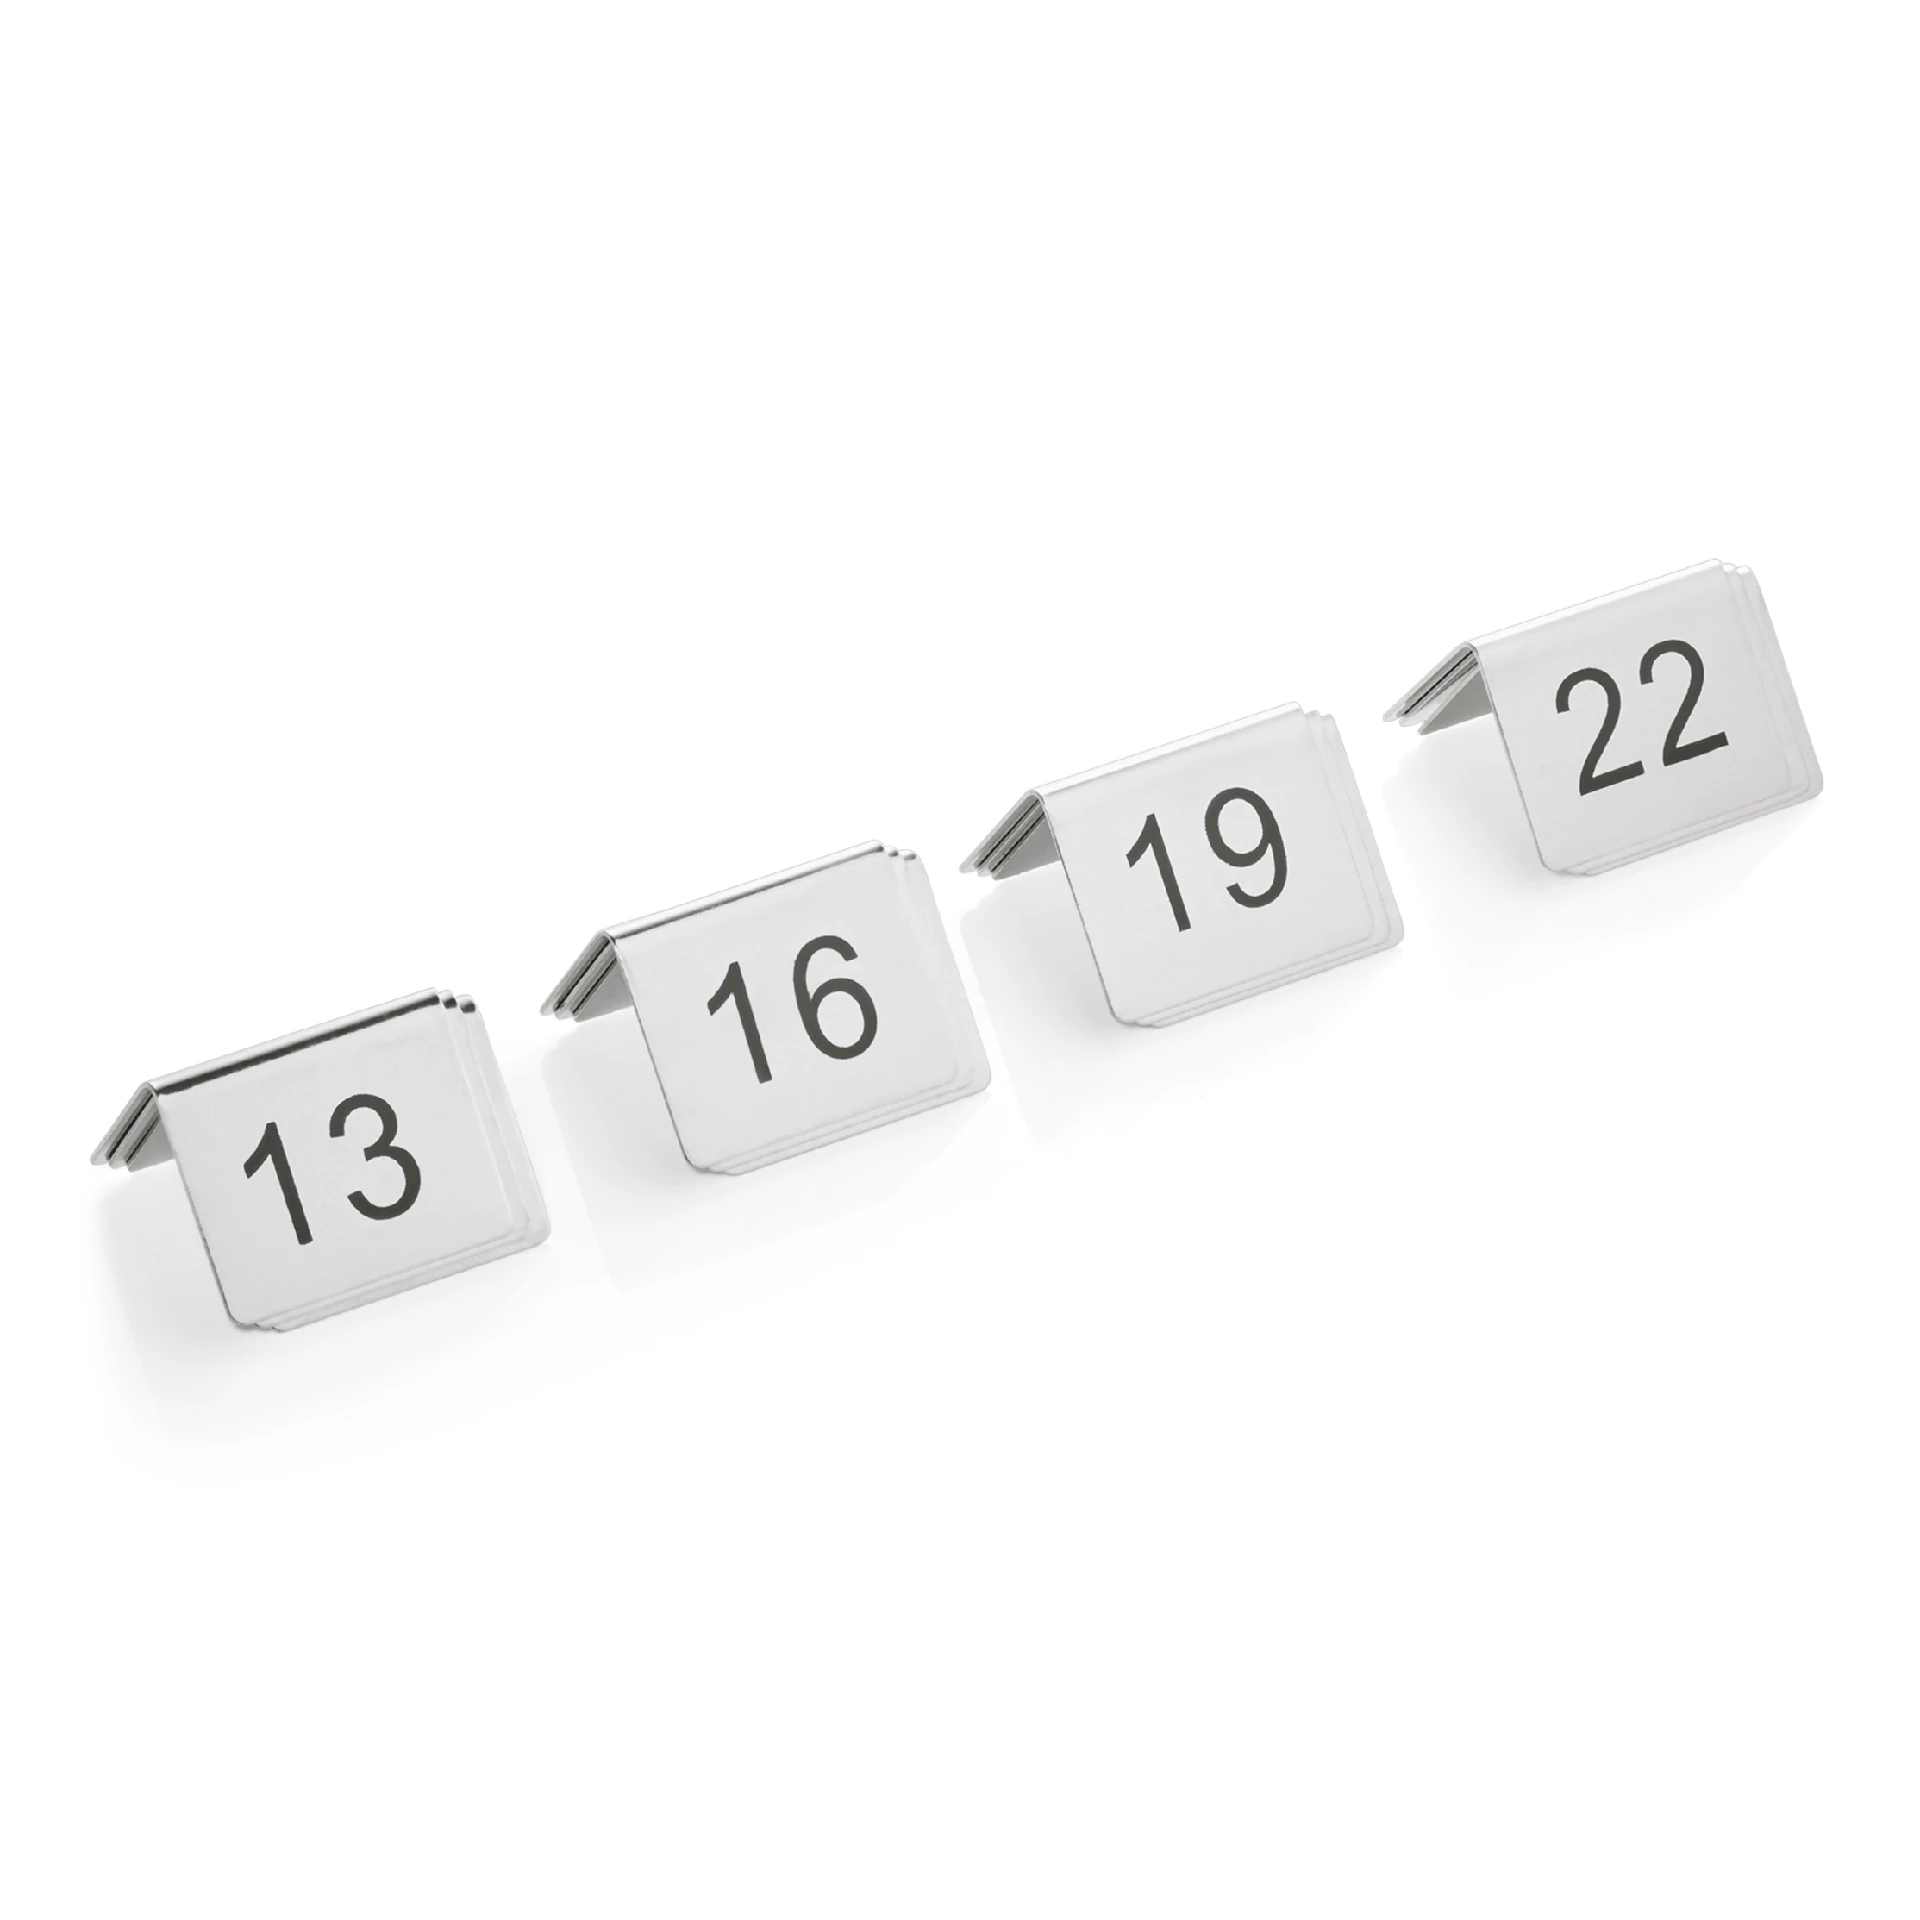 Set of table number signs